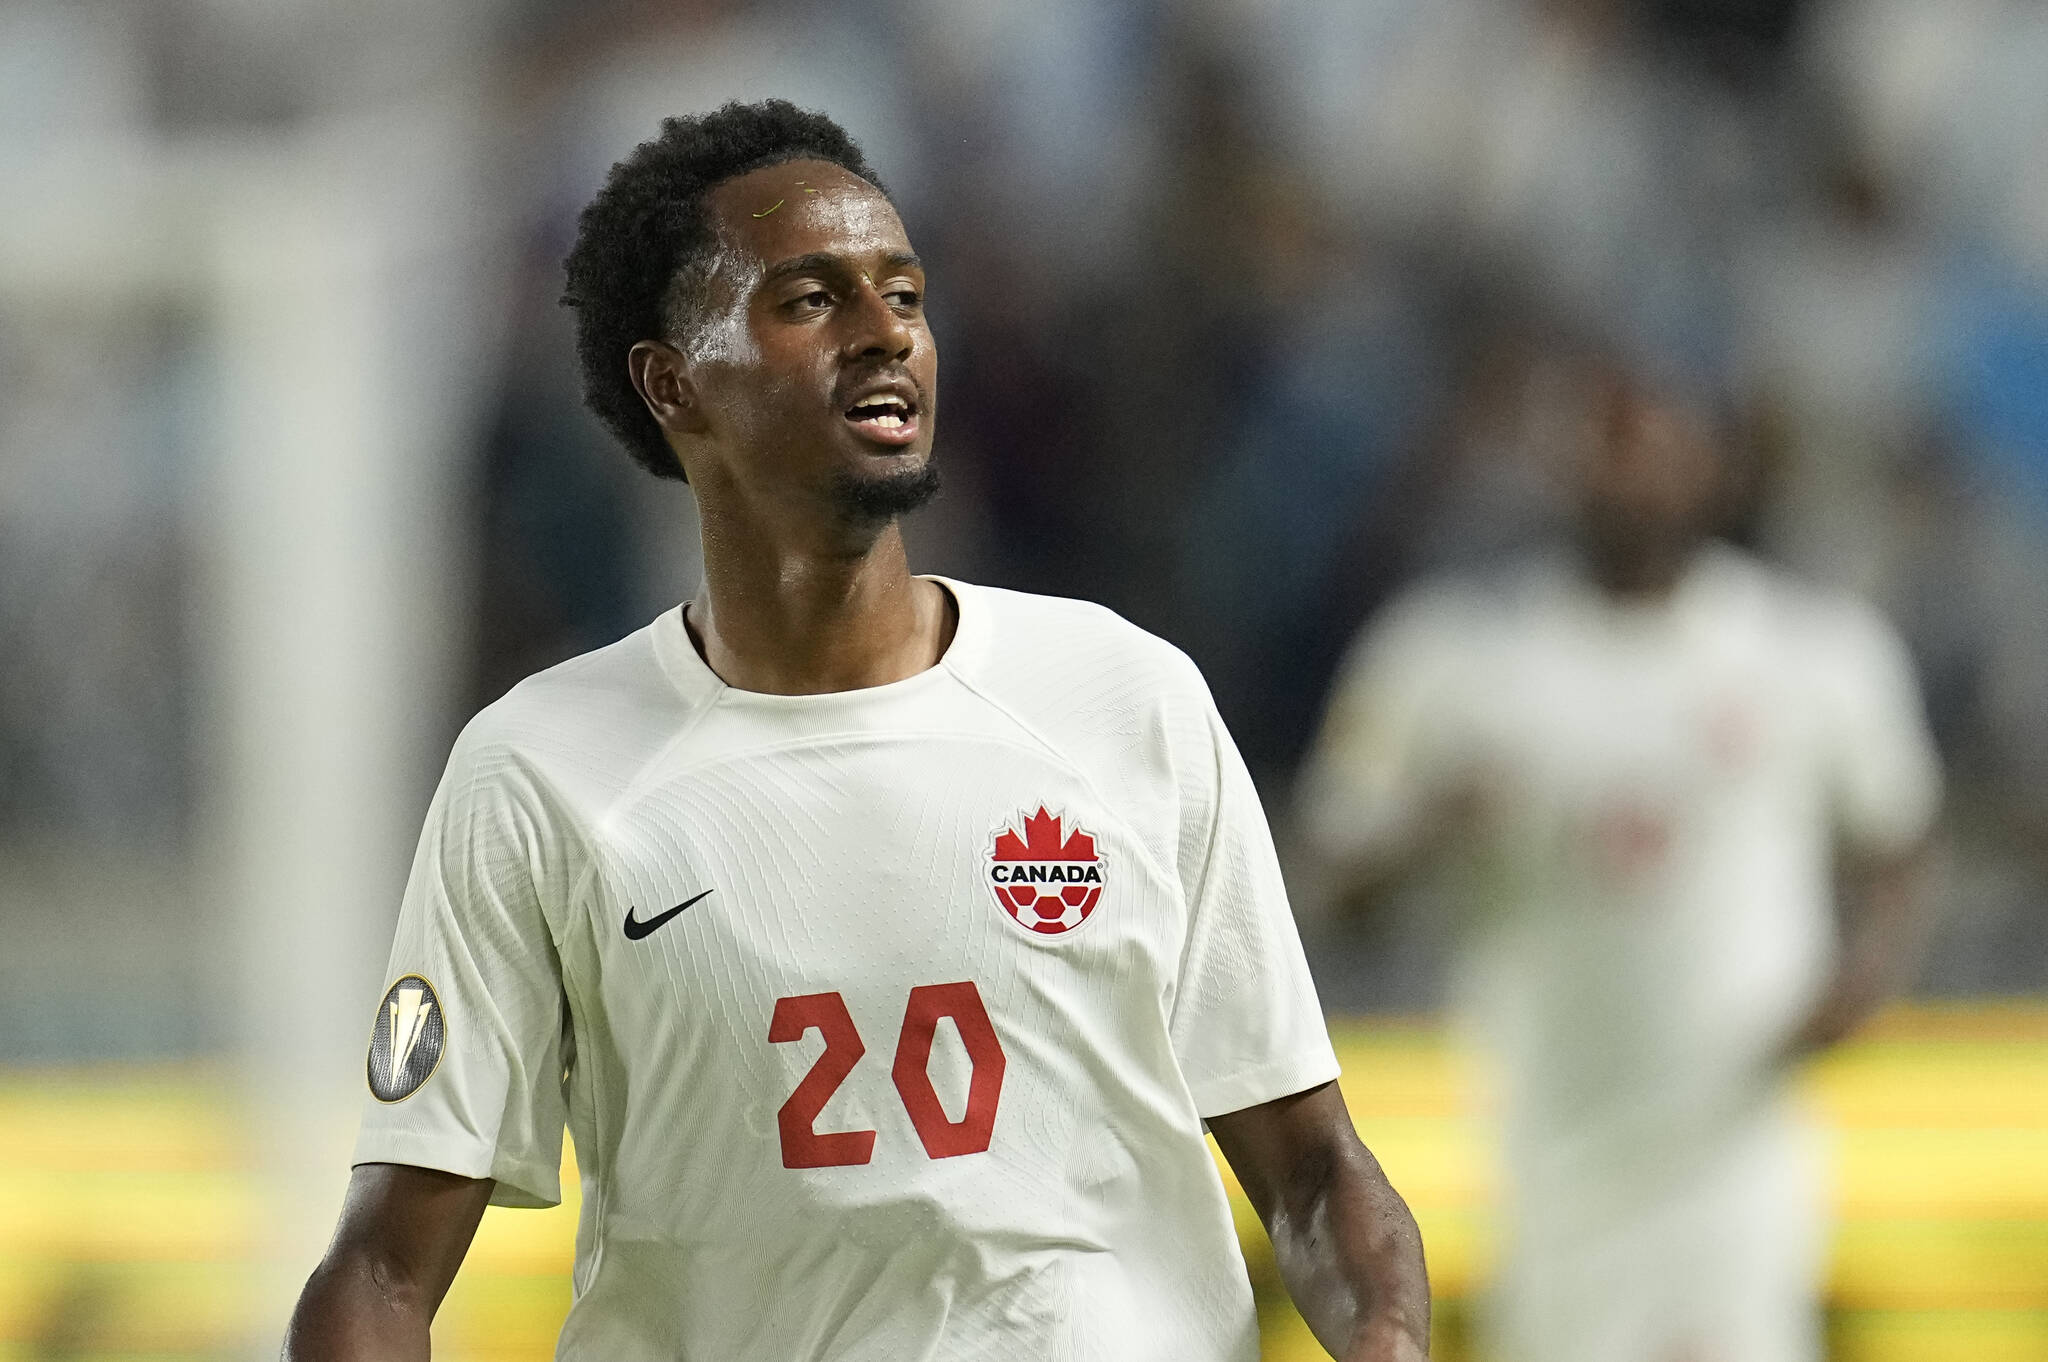 Canada’s Ali Ahmed (20) runs up the field during the second half of a CONCACAF Gold Cup soccer match against Guatemala Saturday, July 1, 2023, in Houston. (AP Photo/David J. Phillip)